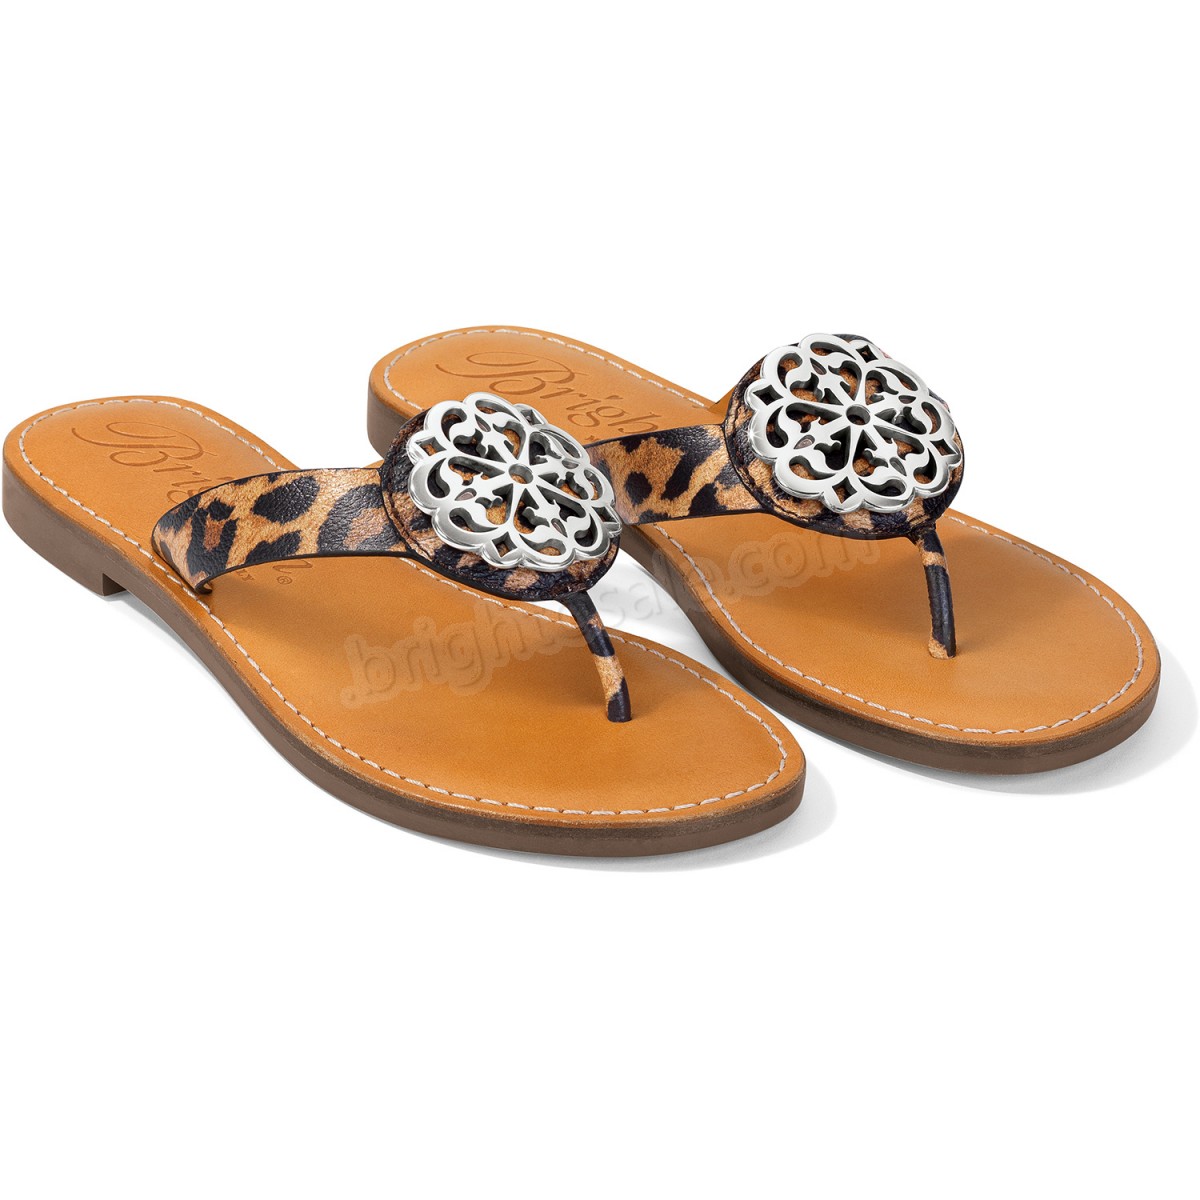 Brighton Collectibles & Online Discount Twine Woven Sandals - -10